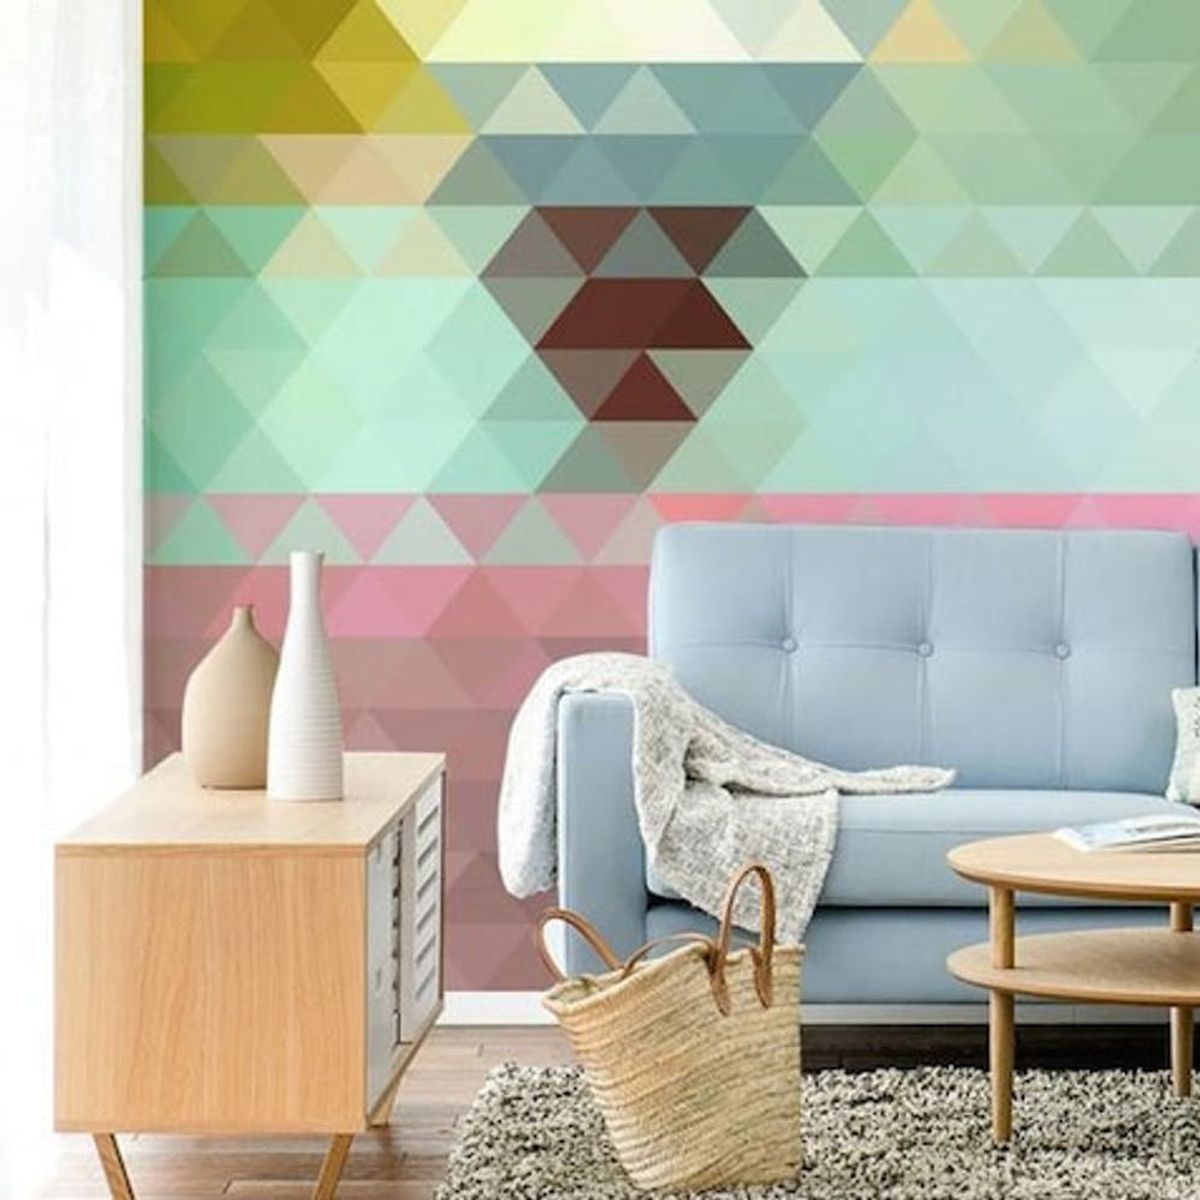 Turn Your Fave Photo into a Wall Mural With This New Service